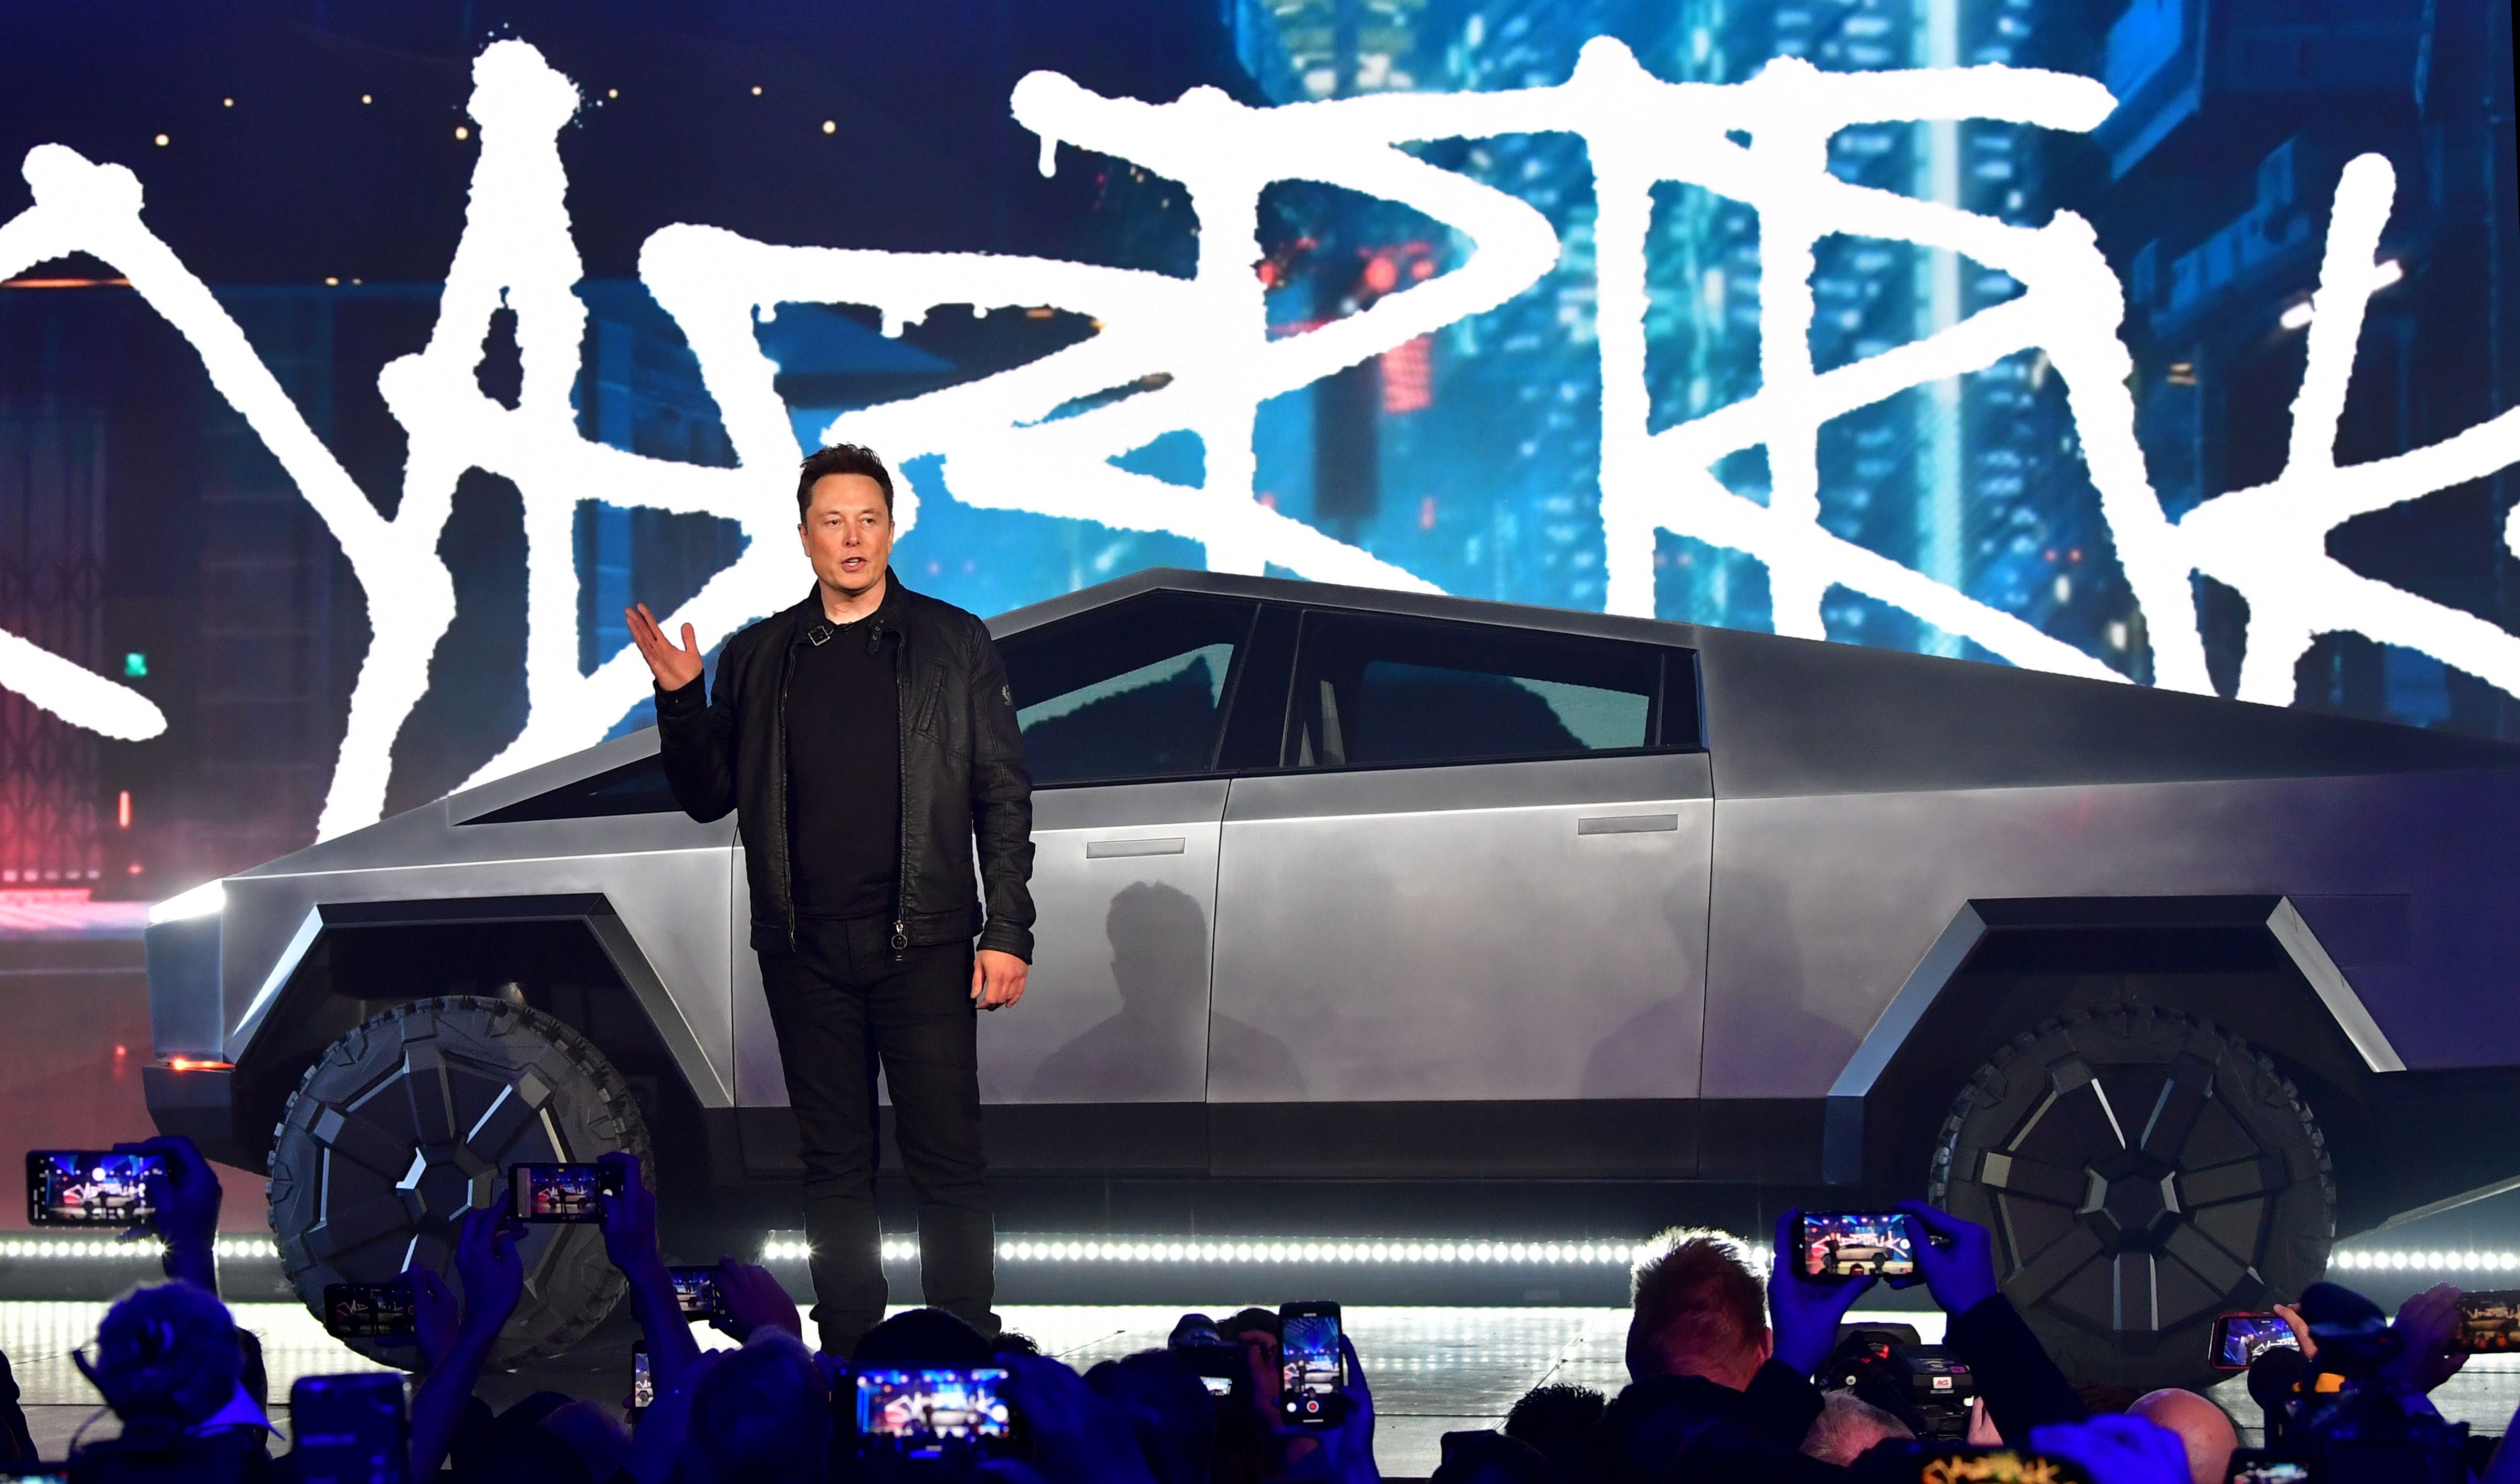 Tesla boss Elon Musk introduces the newly unveiled all-electric battery-powered Tesla Cybertruck at Tesla Design Center in Hawthorne, California on 21 November 2019